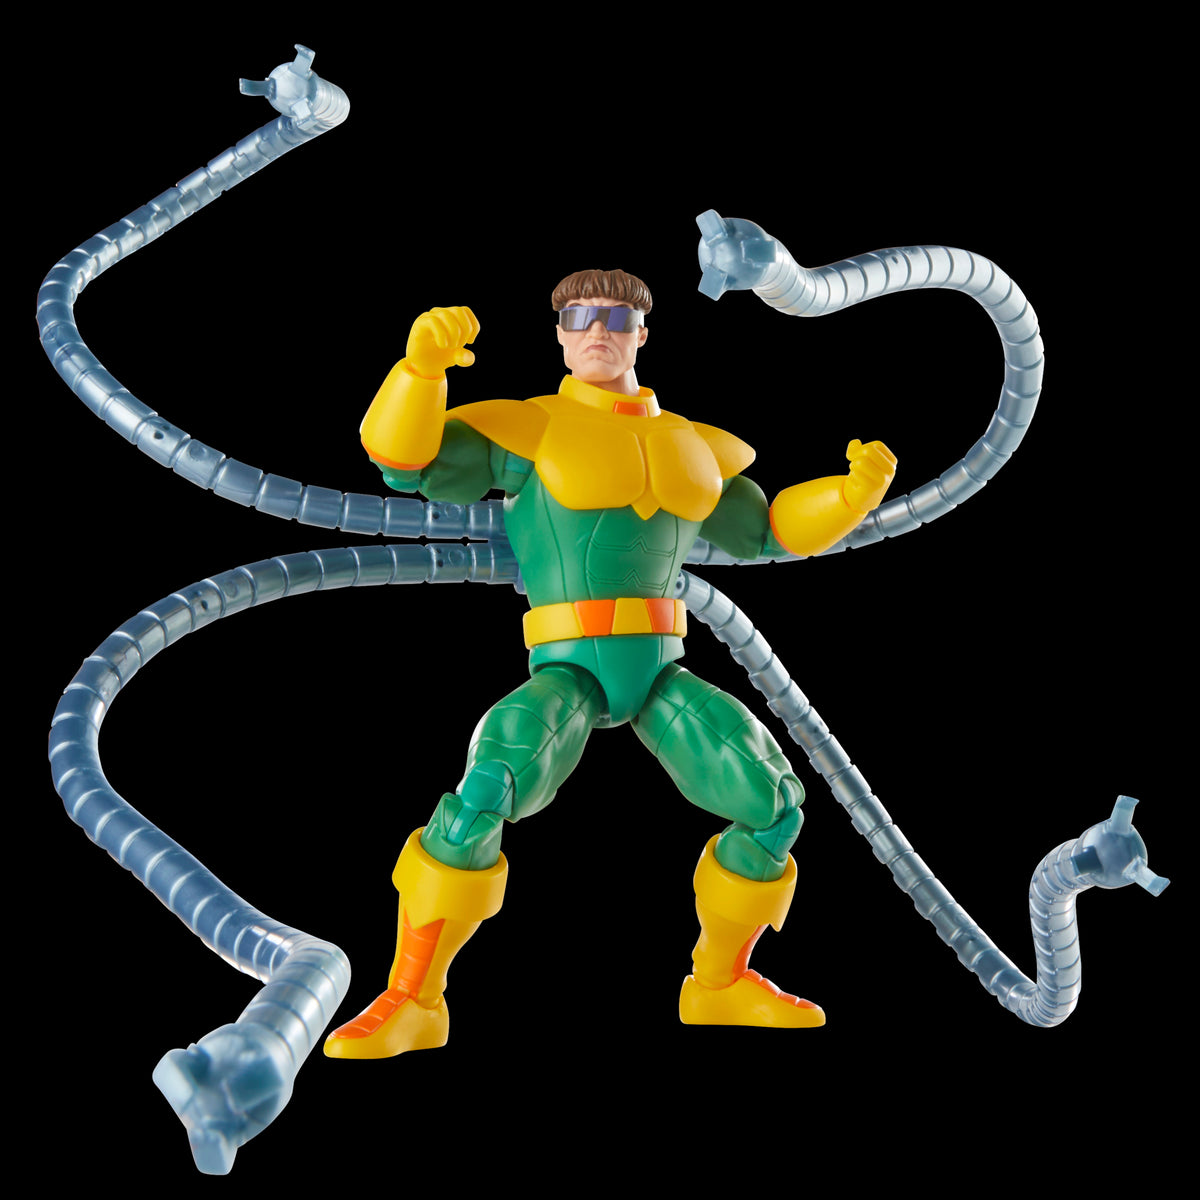 Marvel Legends Series Doctor Octopus & Aunt May 6-Inch Action